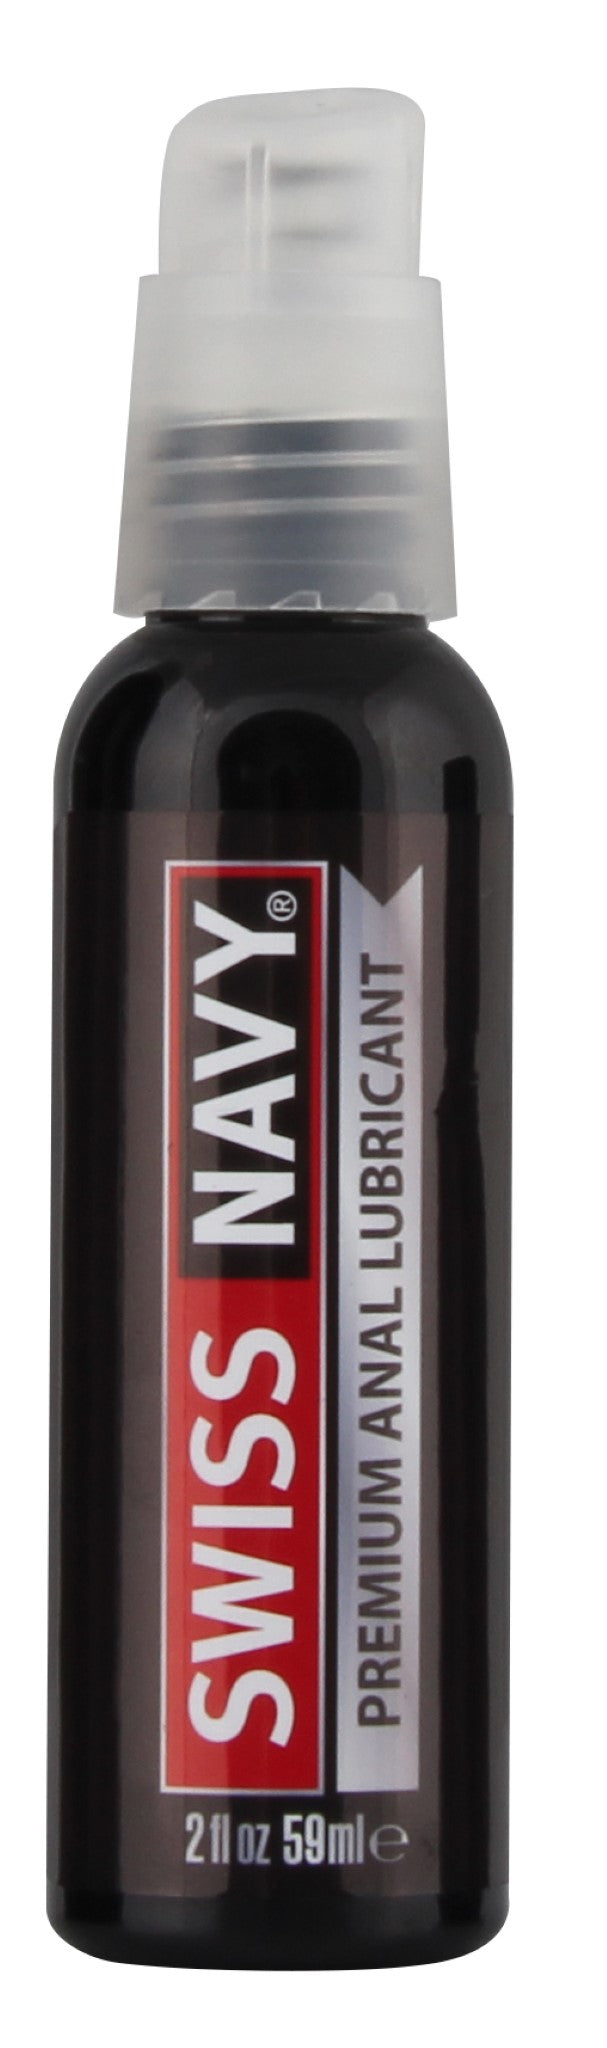 swiss-navy-anal-lubricant